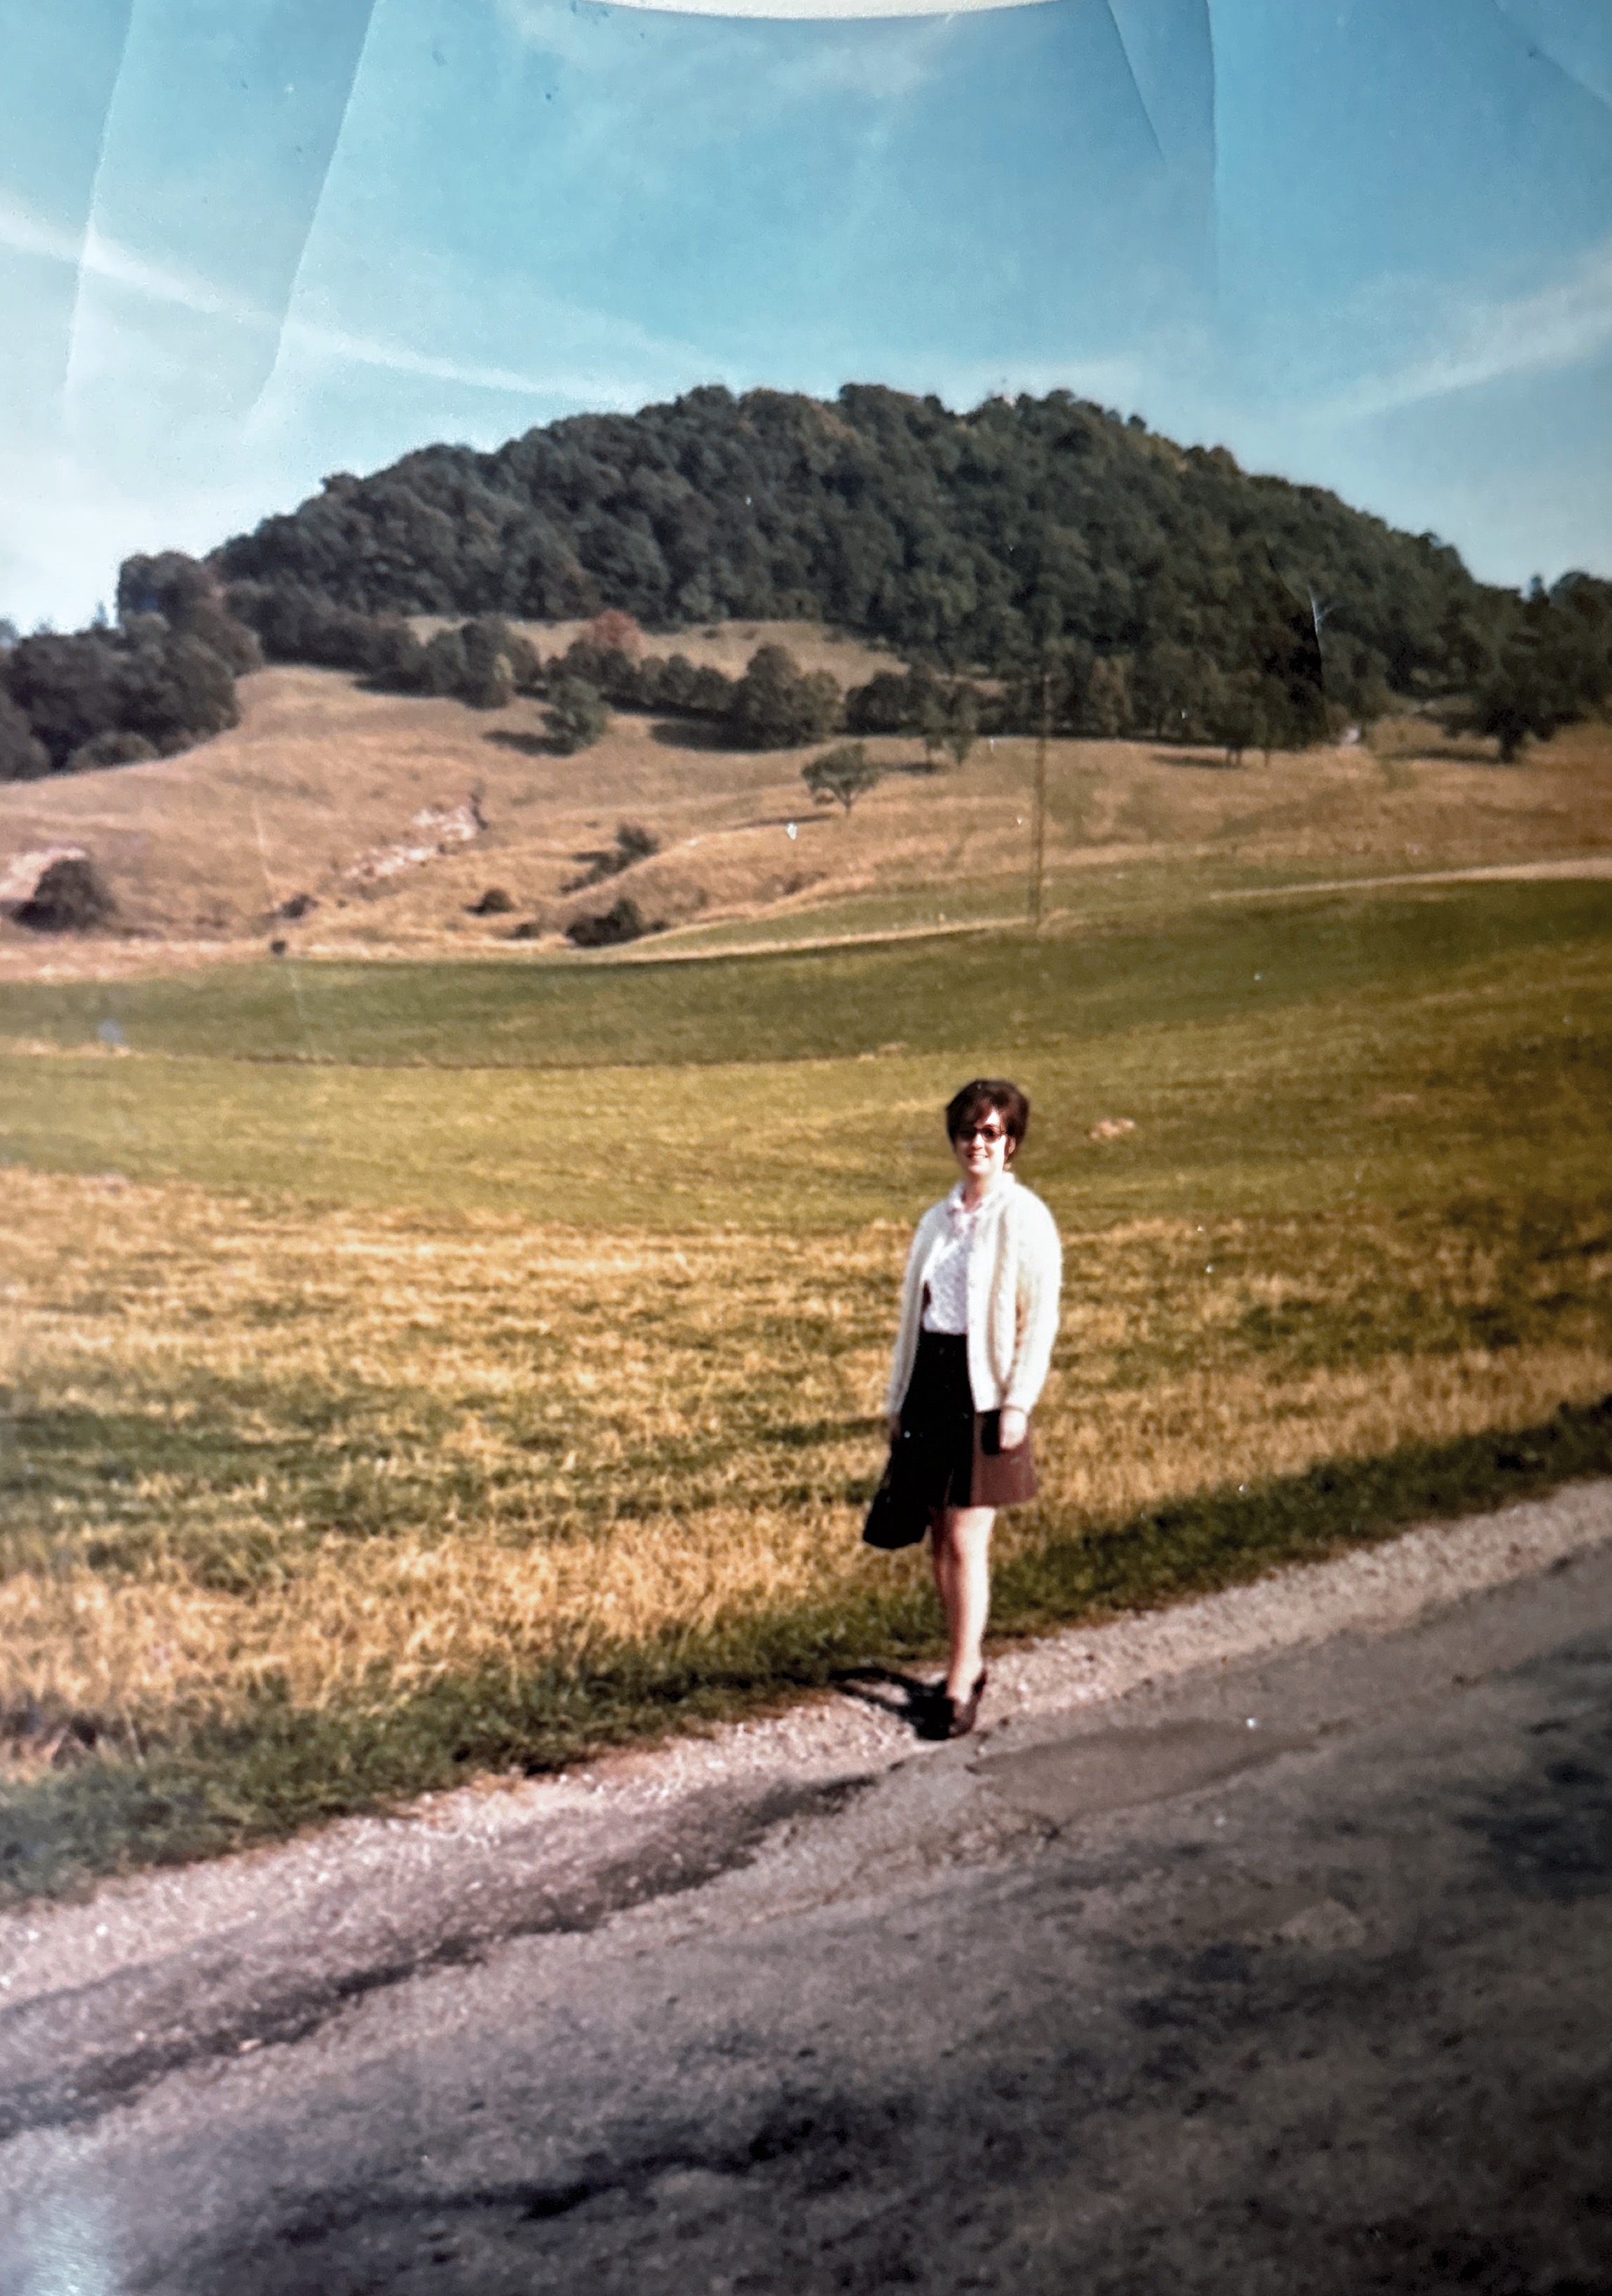 Kathy in front of the Achalm. October 1970.